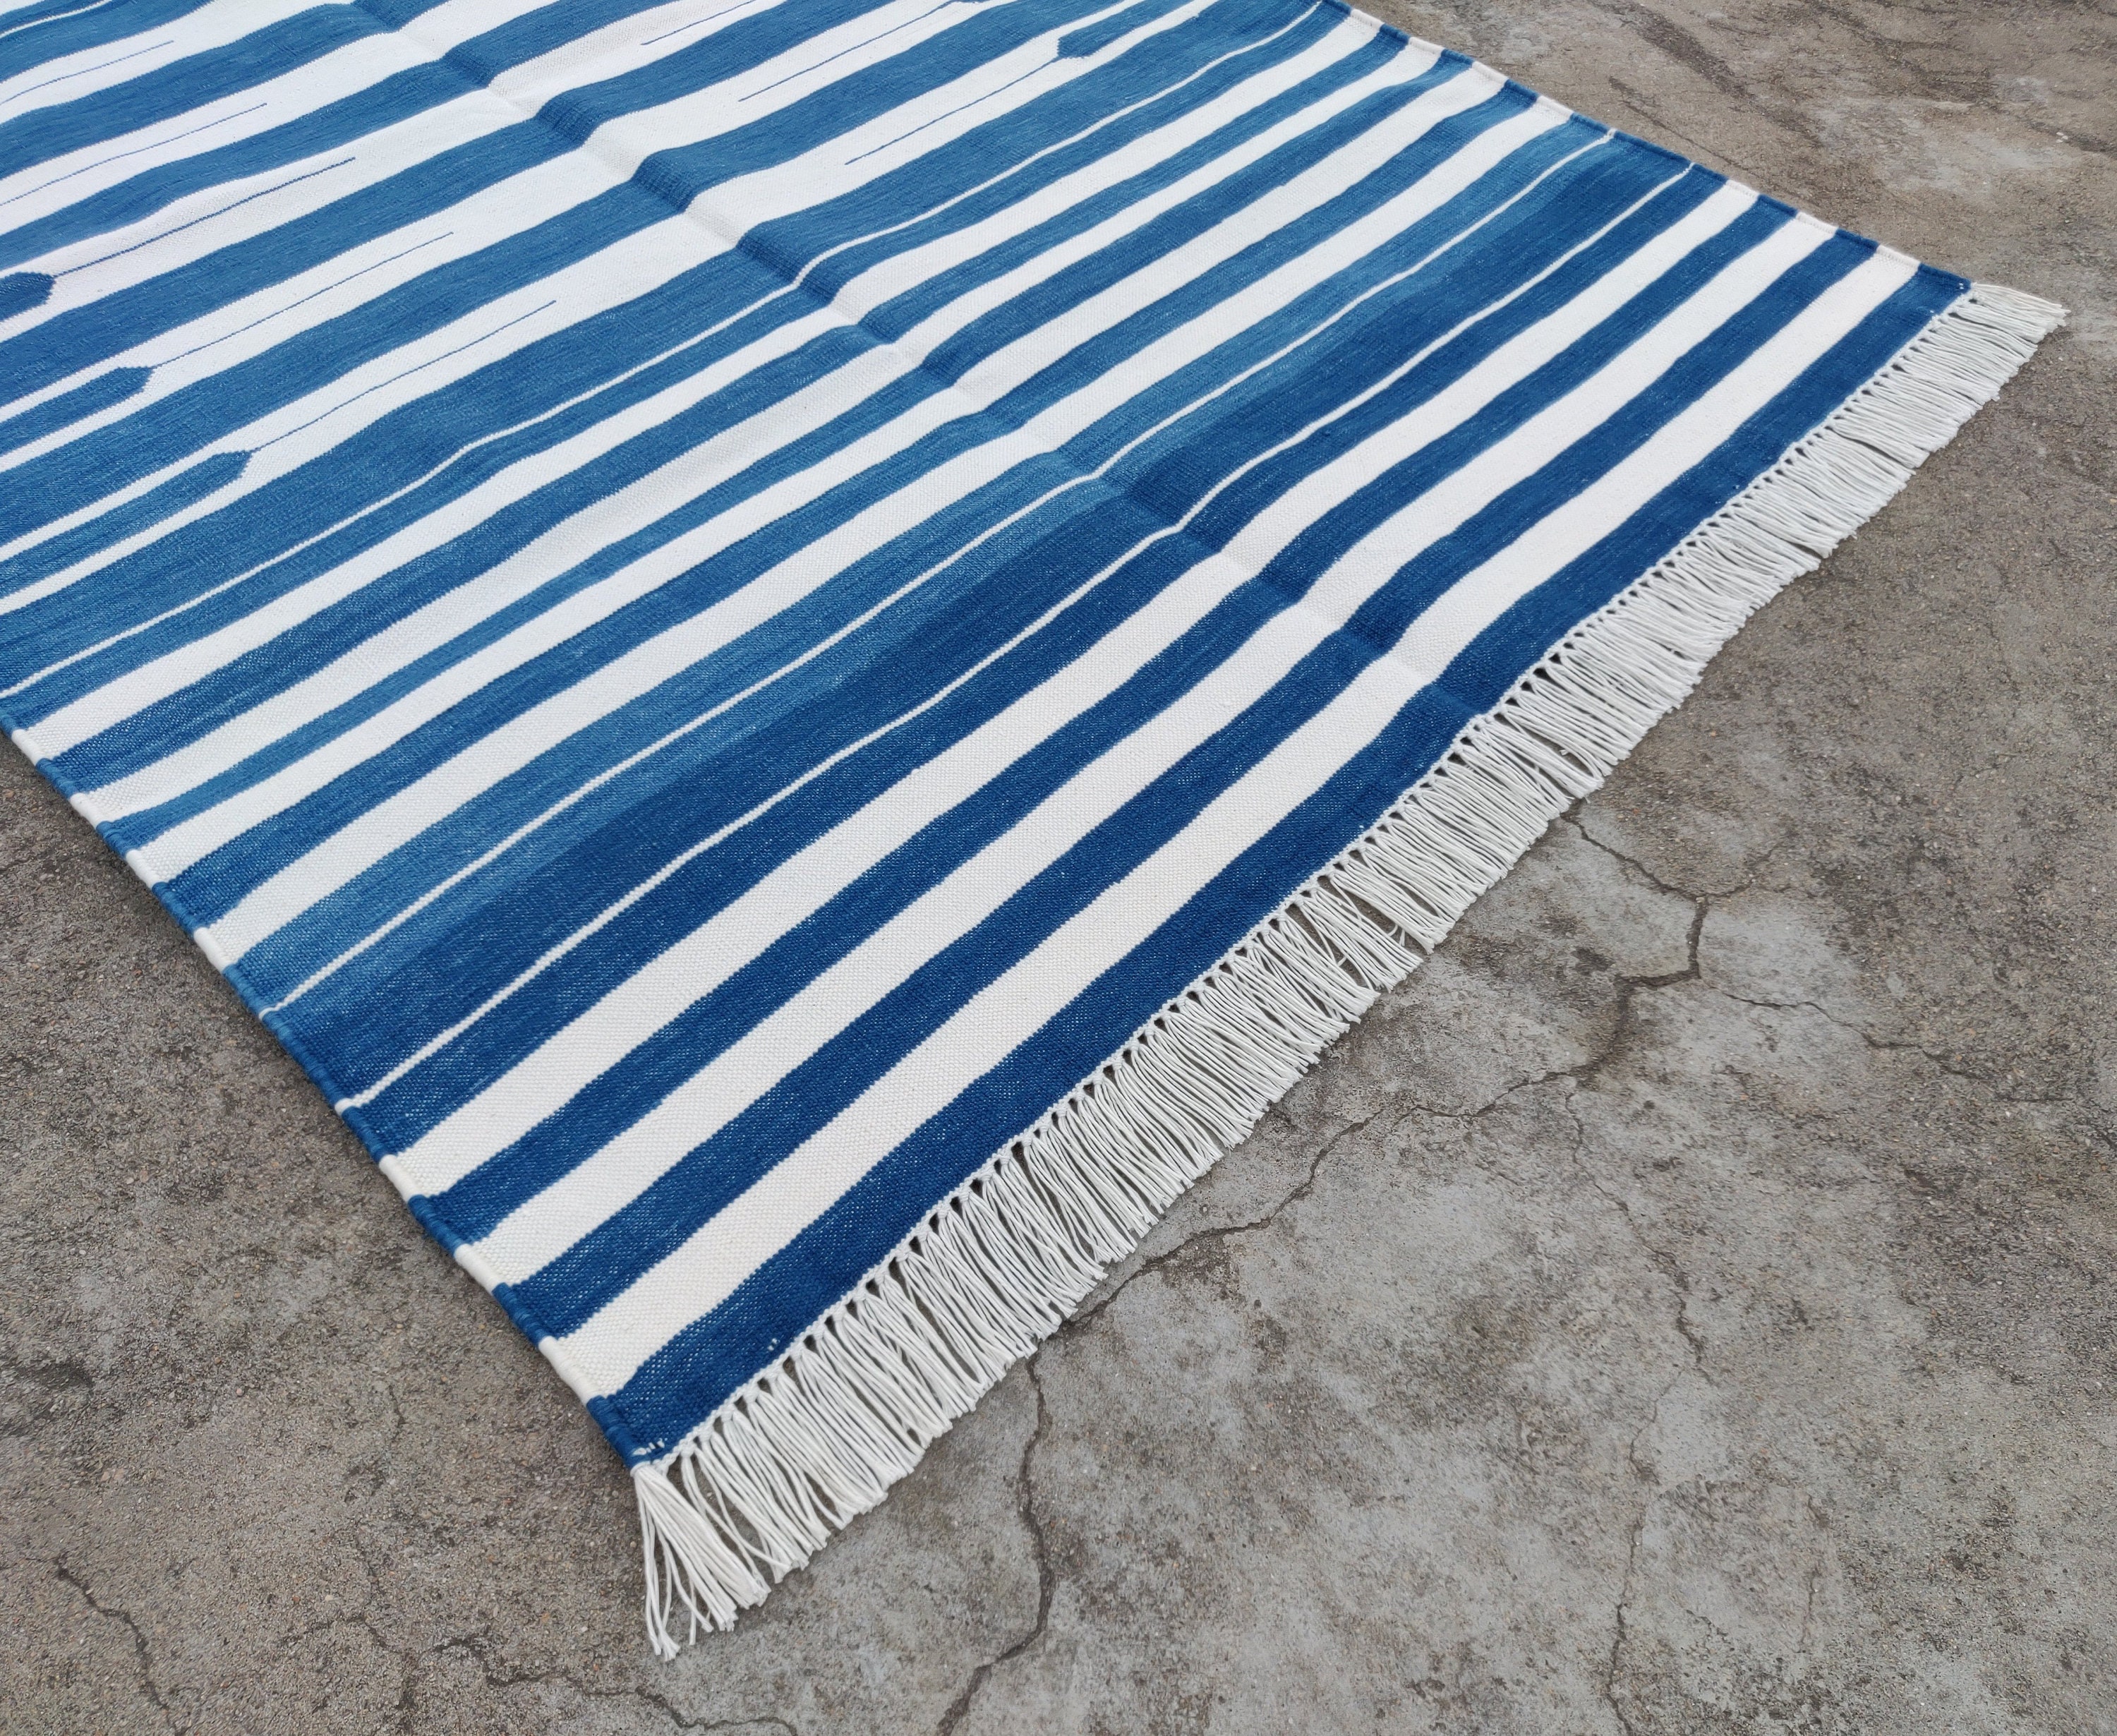 Cotton Rug Flat Weave 3'x5' Hand Woven Hand Made Natural Vegetable Dyed Blue & White Reversible Striped Scallop Edge Dhurrie Area Rug Kilim